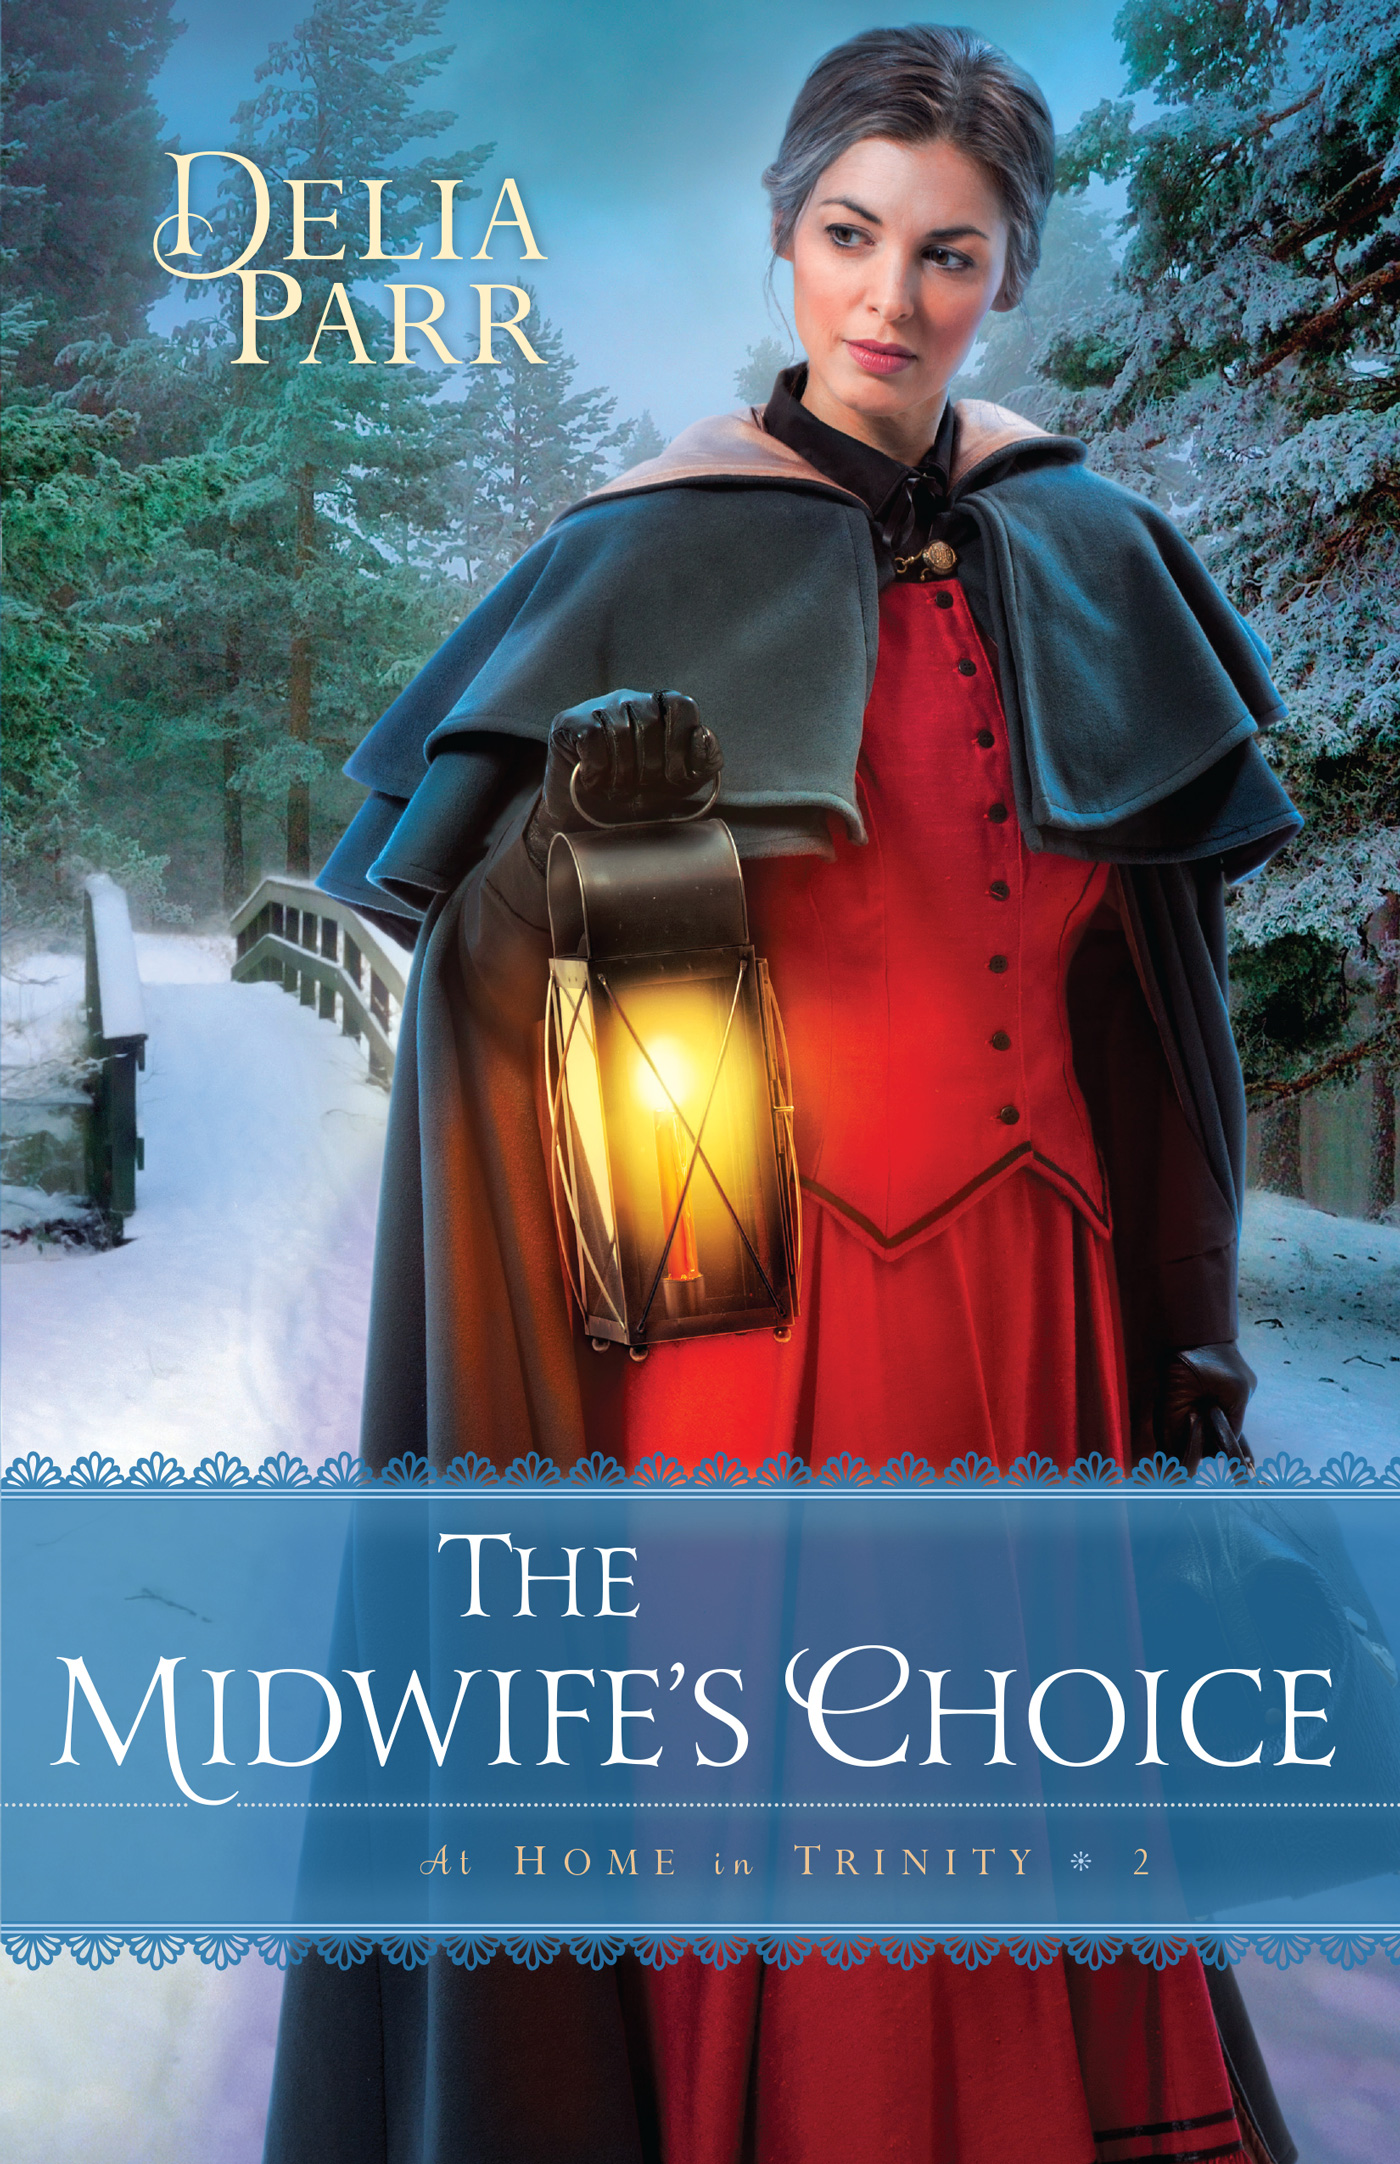 The Midwife's Choice (2015) by Delia Parr